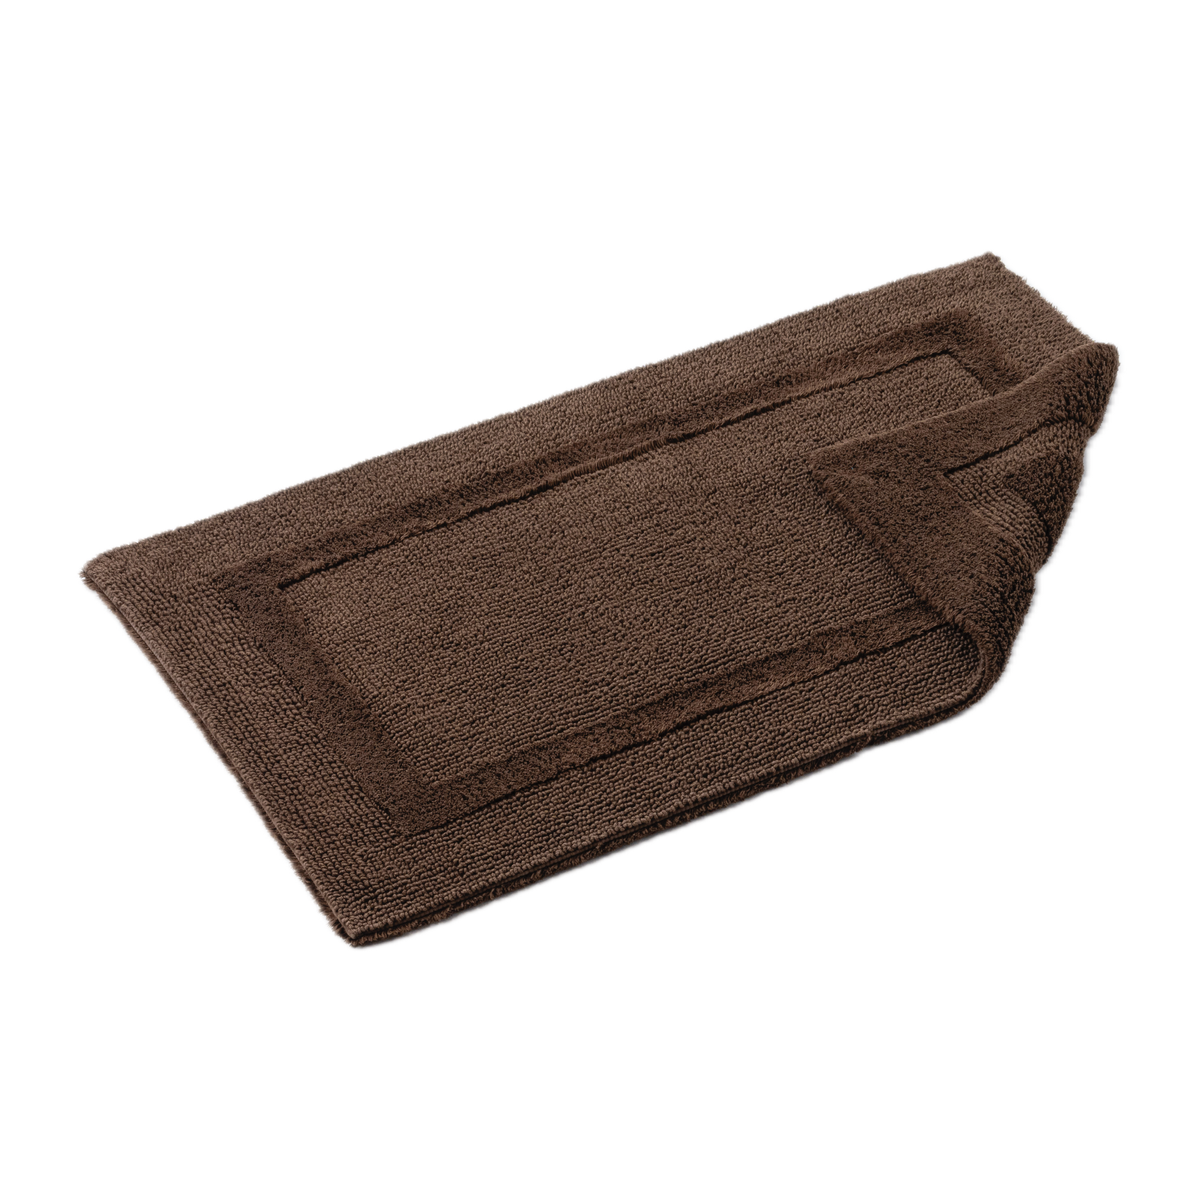 Tilted Image of Abyss Habidecor Reversible Bath Rug in Mustang Color